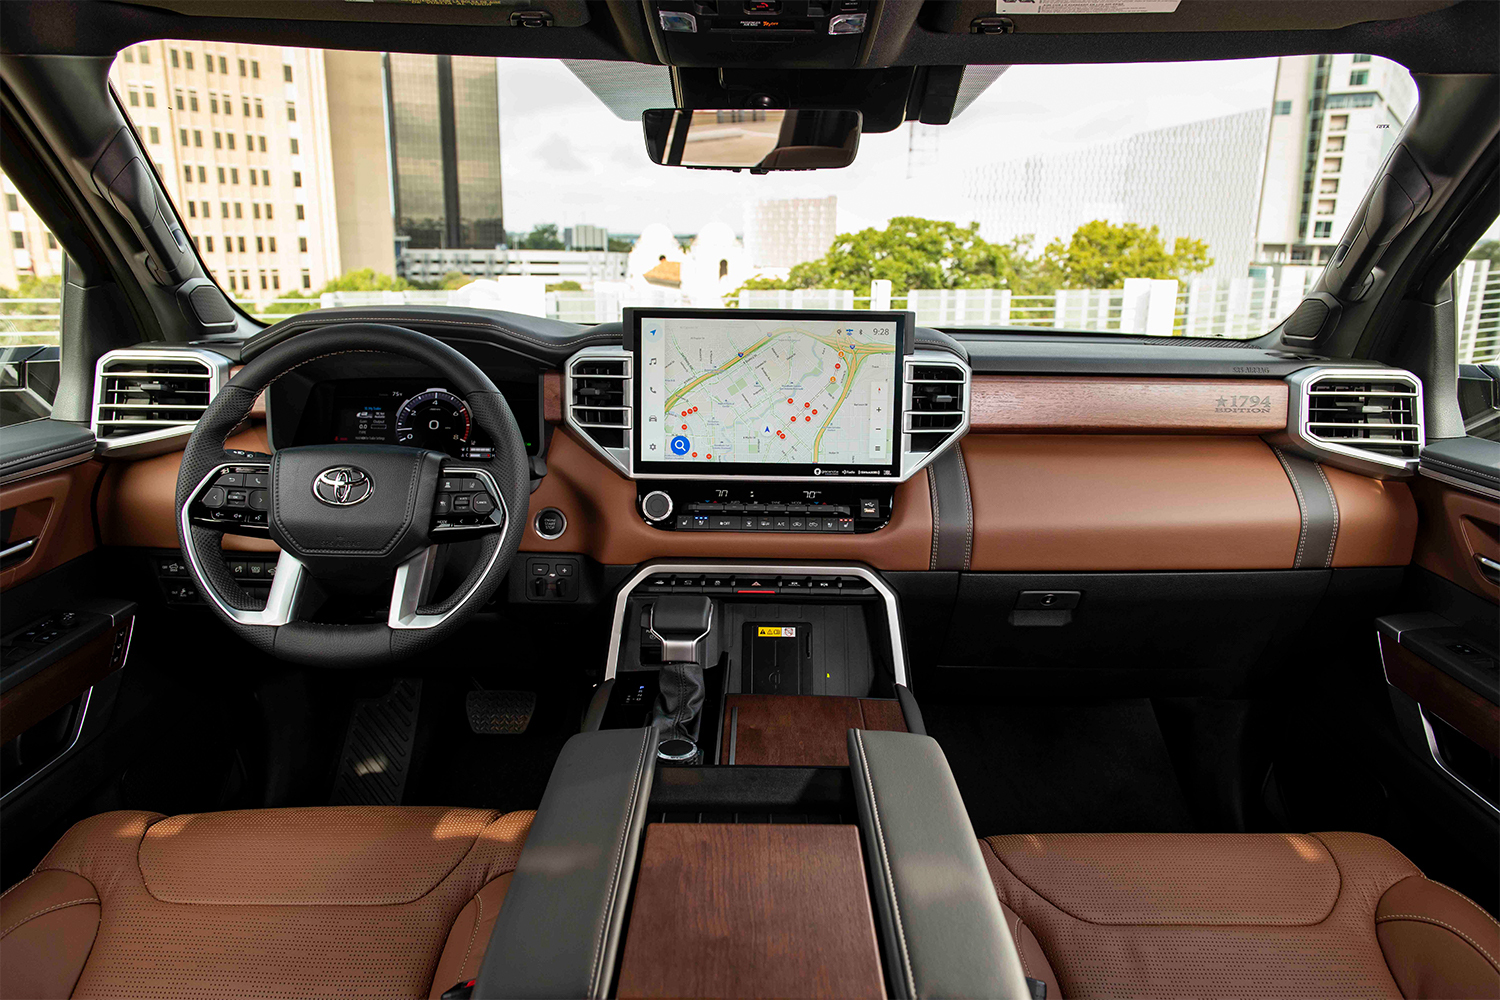 Dashboard of the 2022 Toyota Tundra 1974 Edition in smoked mesquite brown